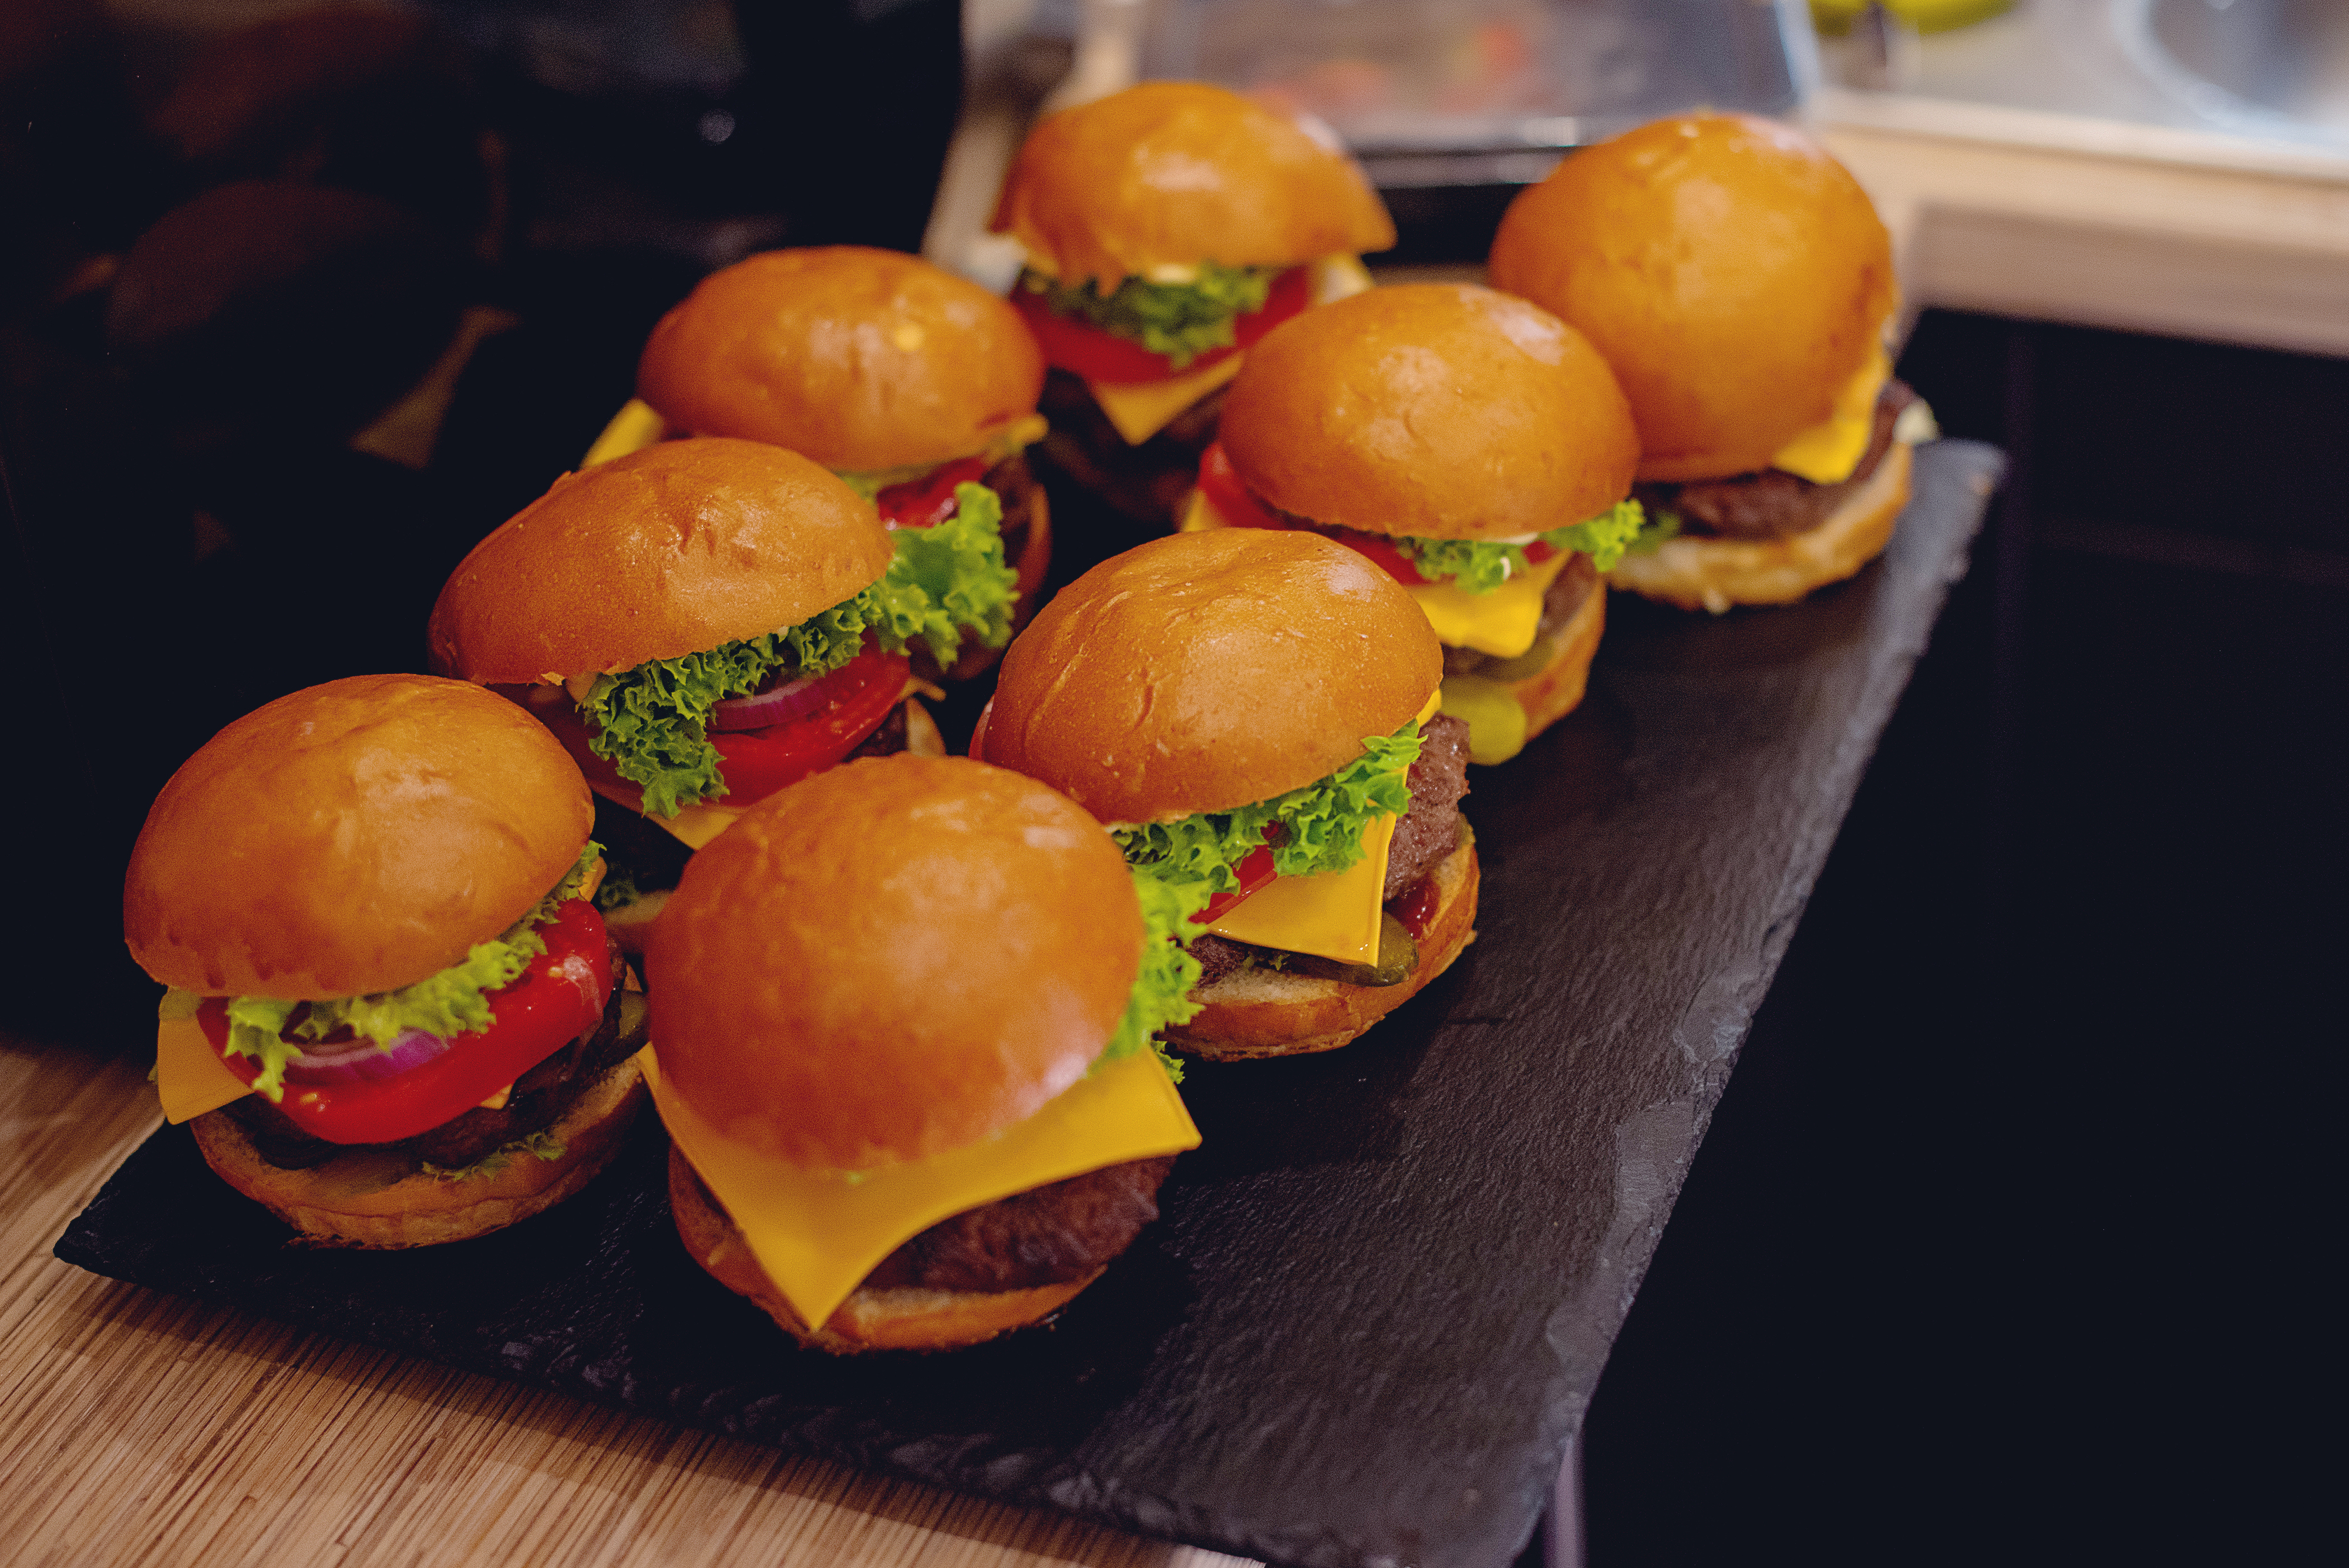 Two rows of cheeseburgers on a tray